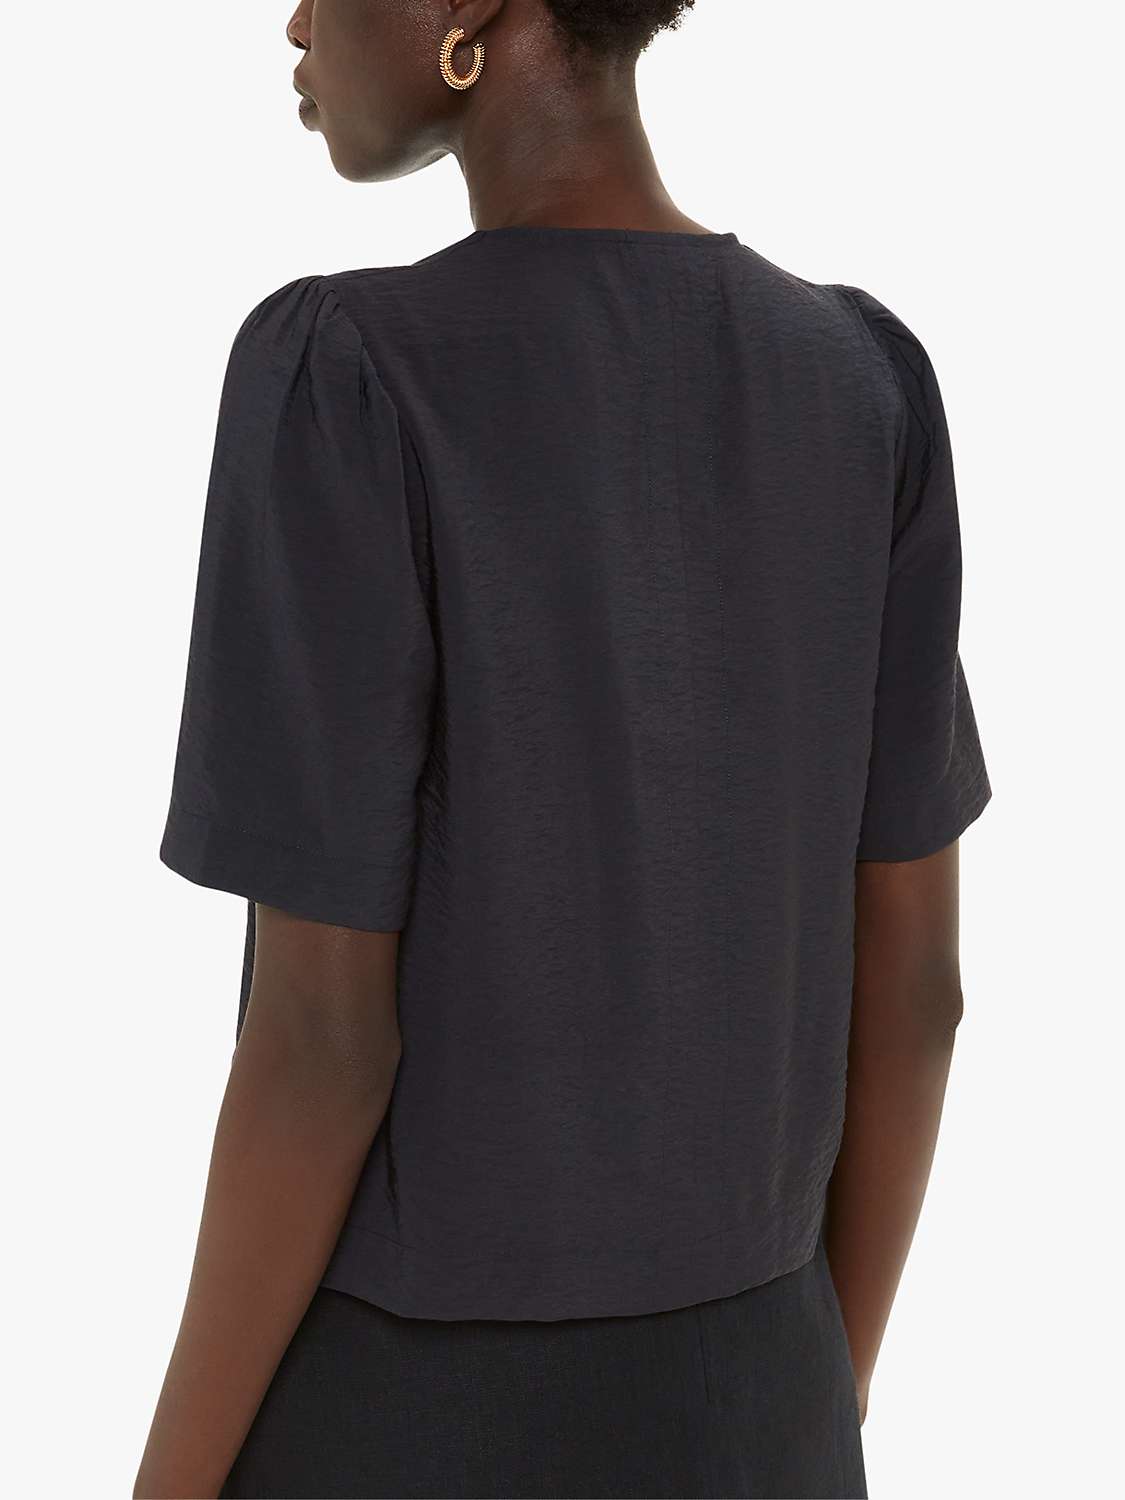 Buy Whistles Nicola Bow Front Top, Black Online at johnlewis.com